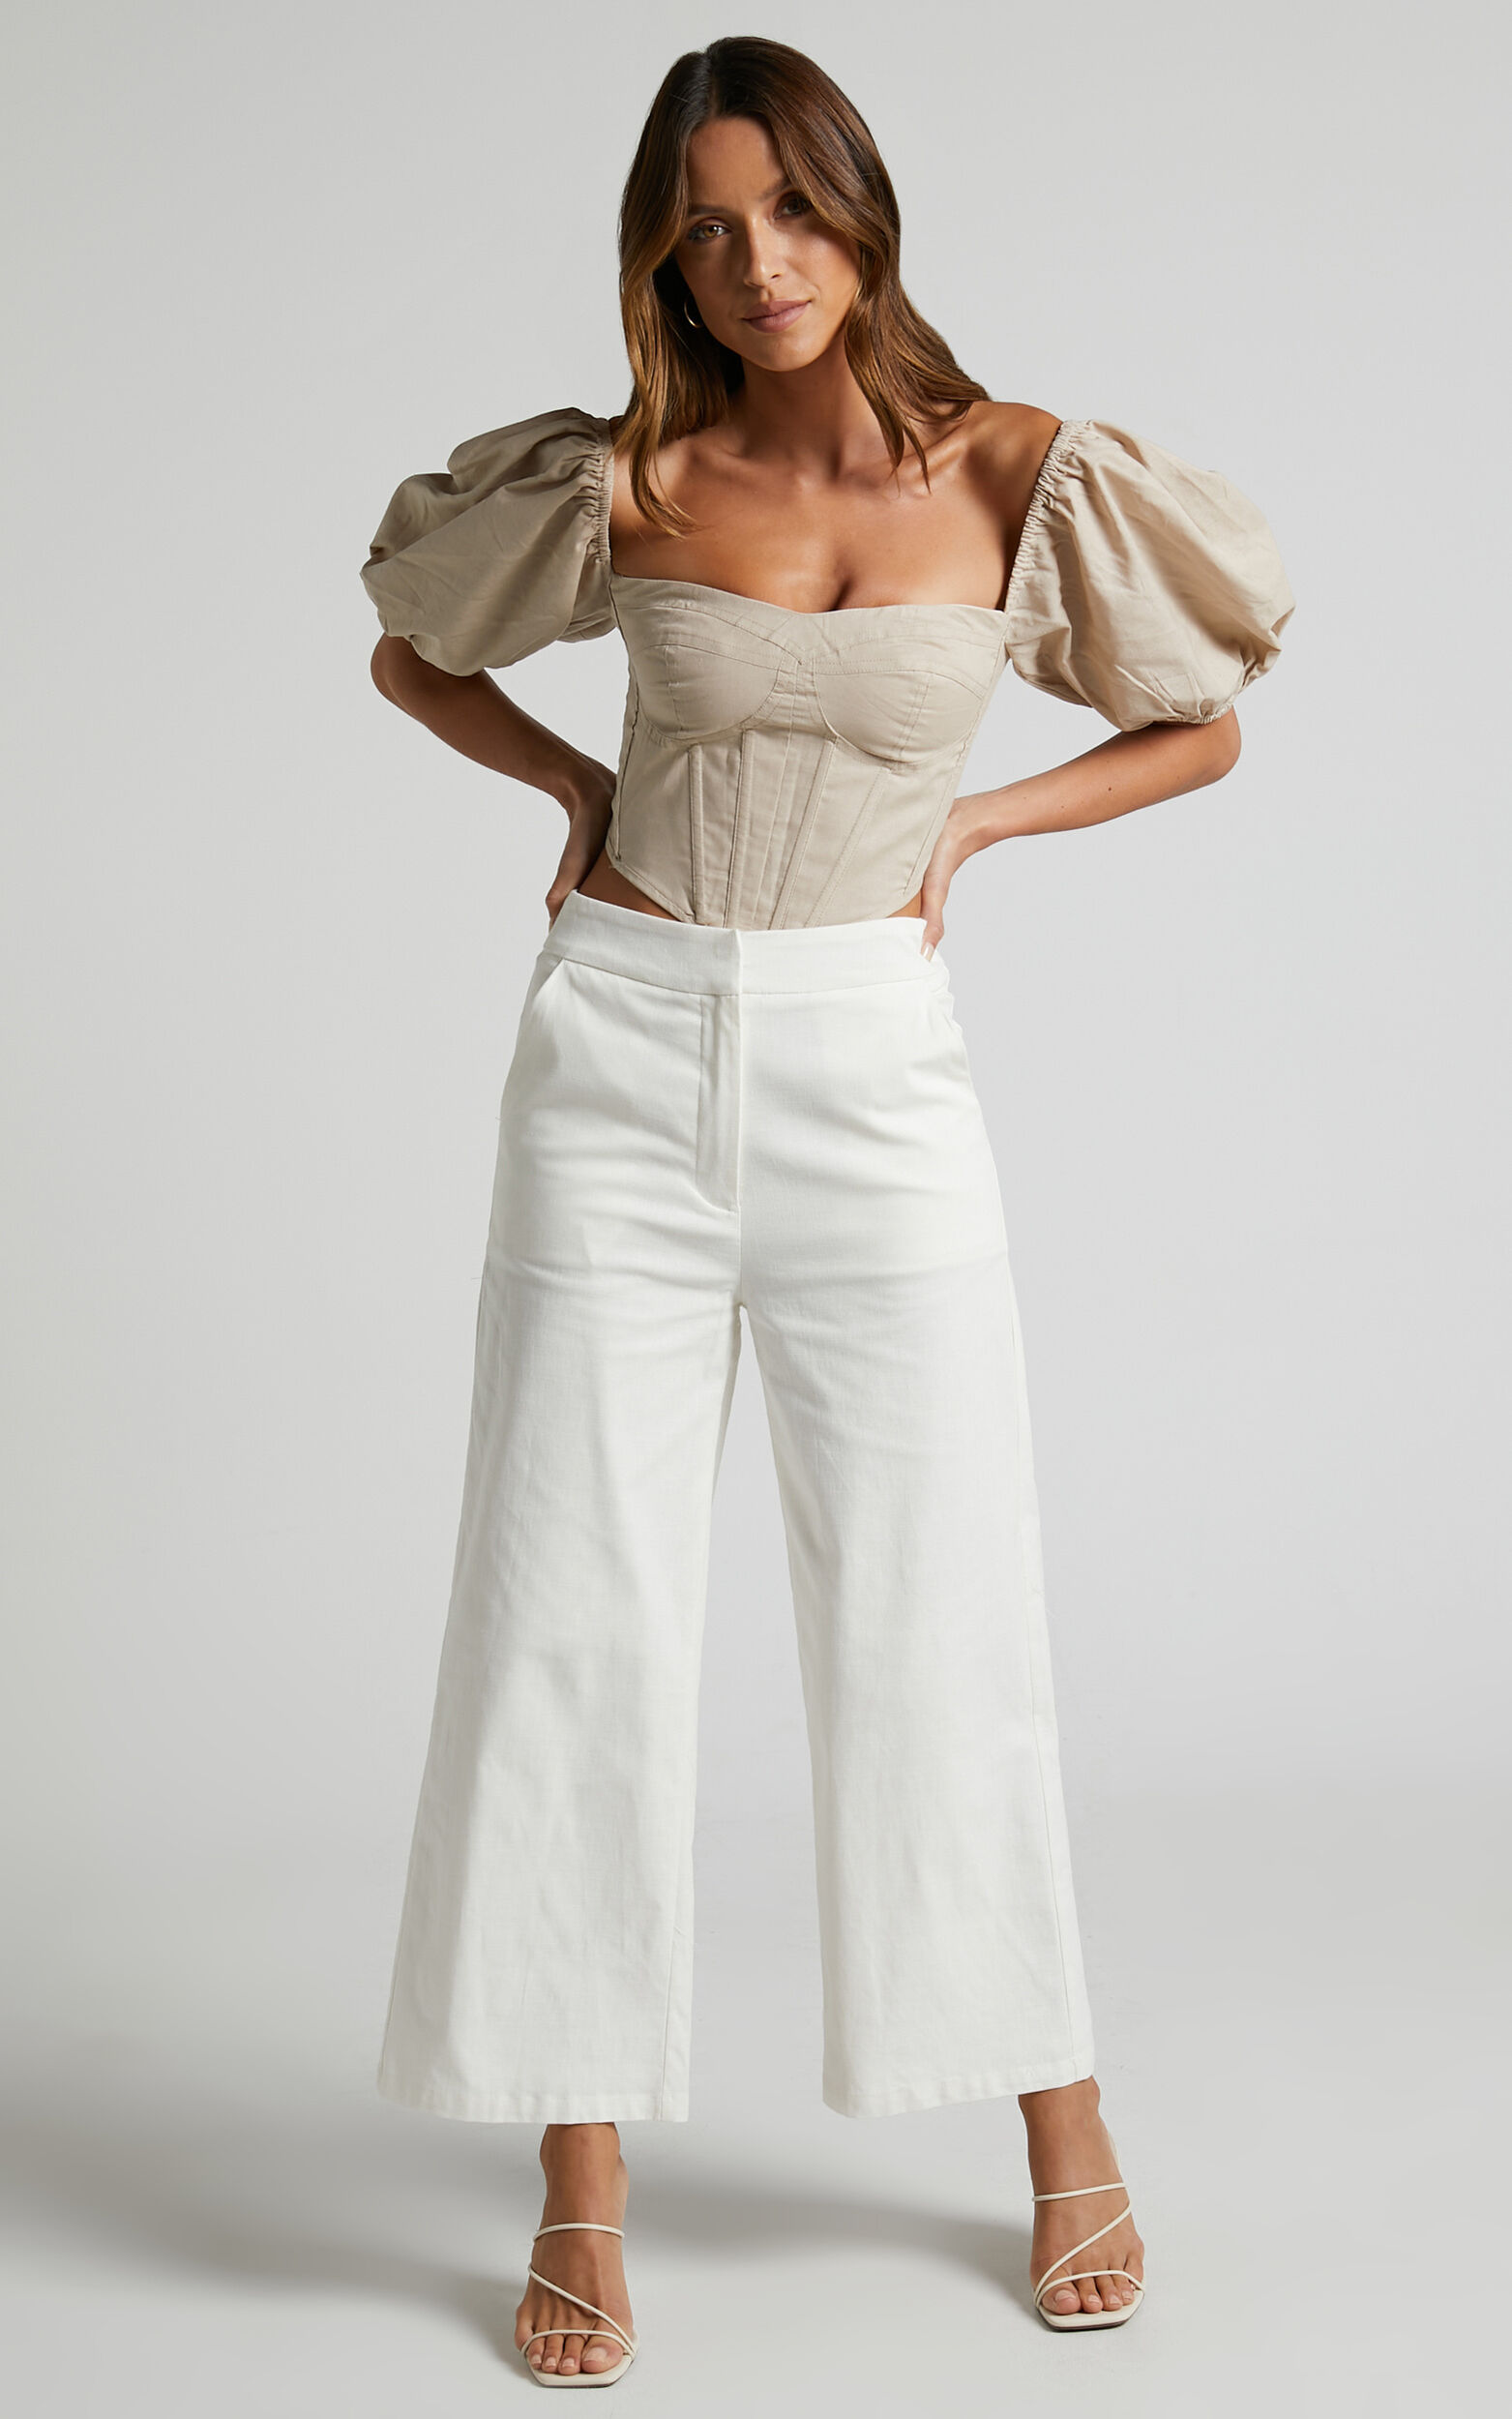 RHAILA PANTS - MID RISE RELAXED WIDE LEG CULOTTE PANTS in White - 04, WHT1